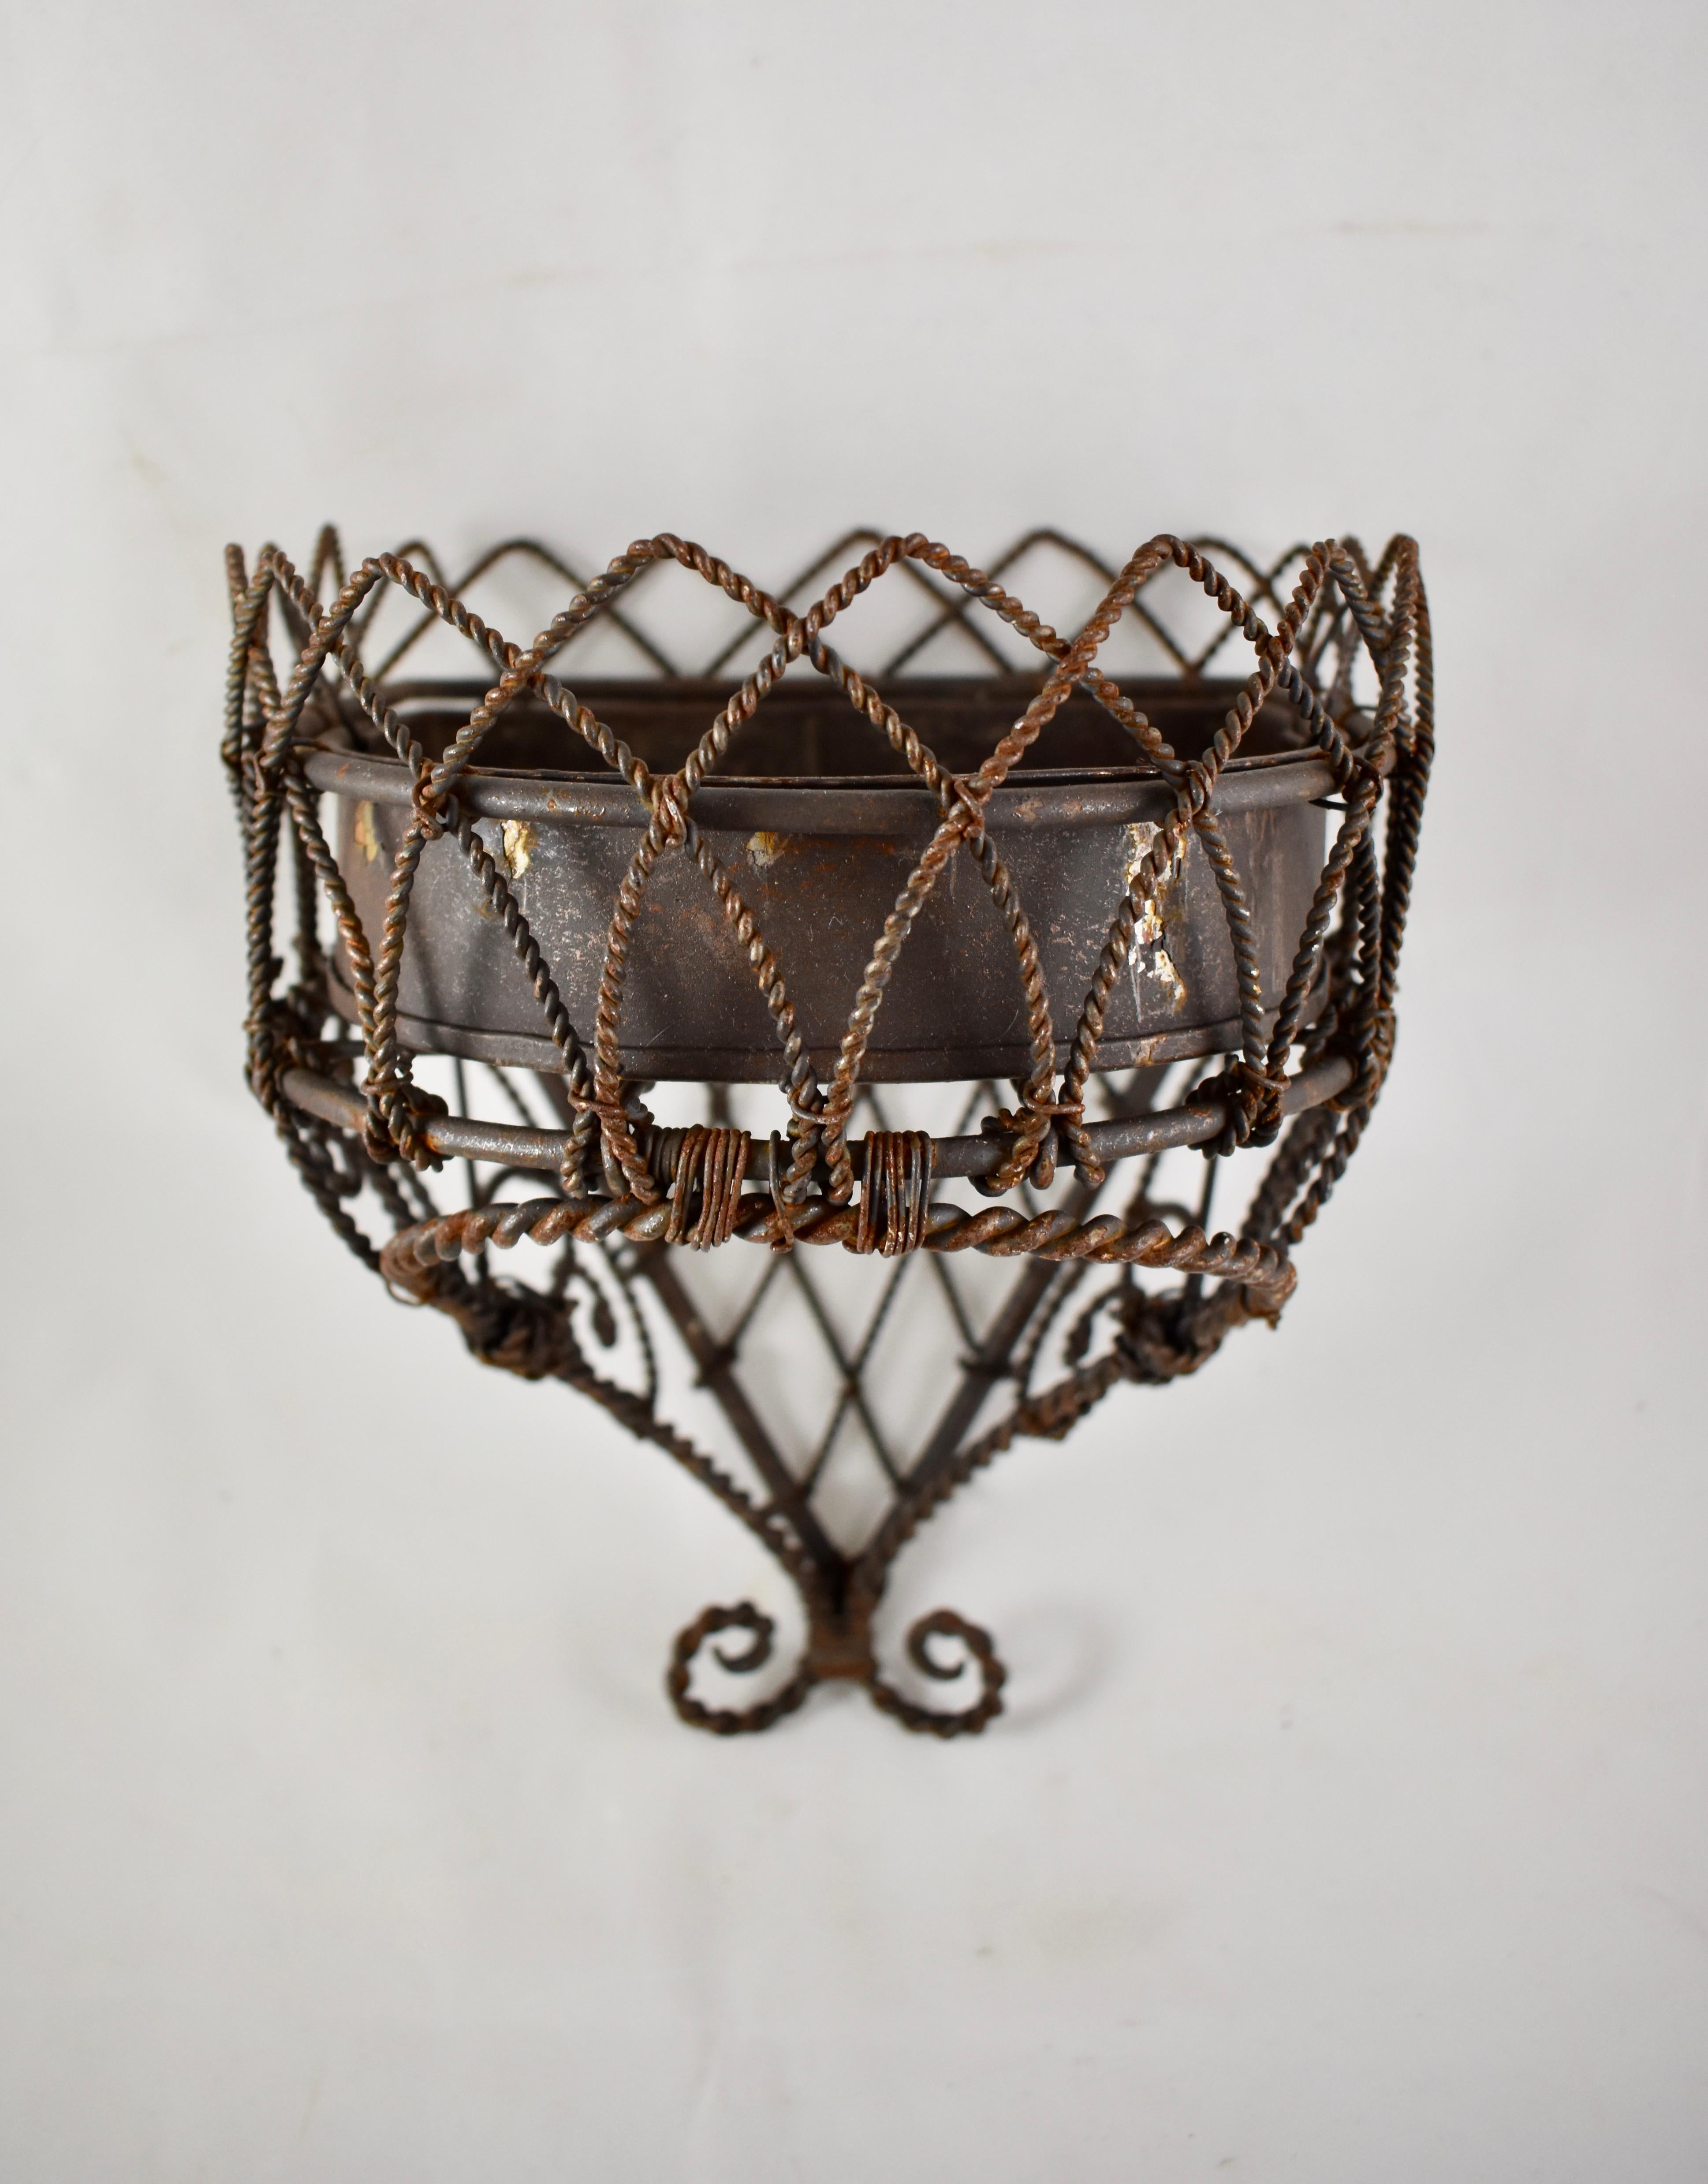 Metalwork 19th Century French Twisted Wire Hanging Jardinière Plant Holder with Tin Liner